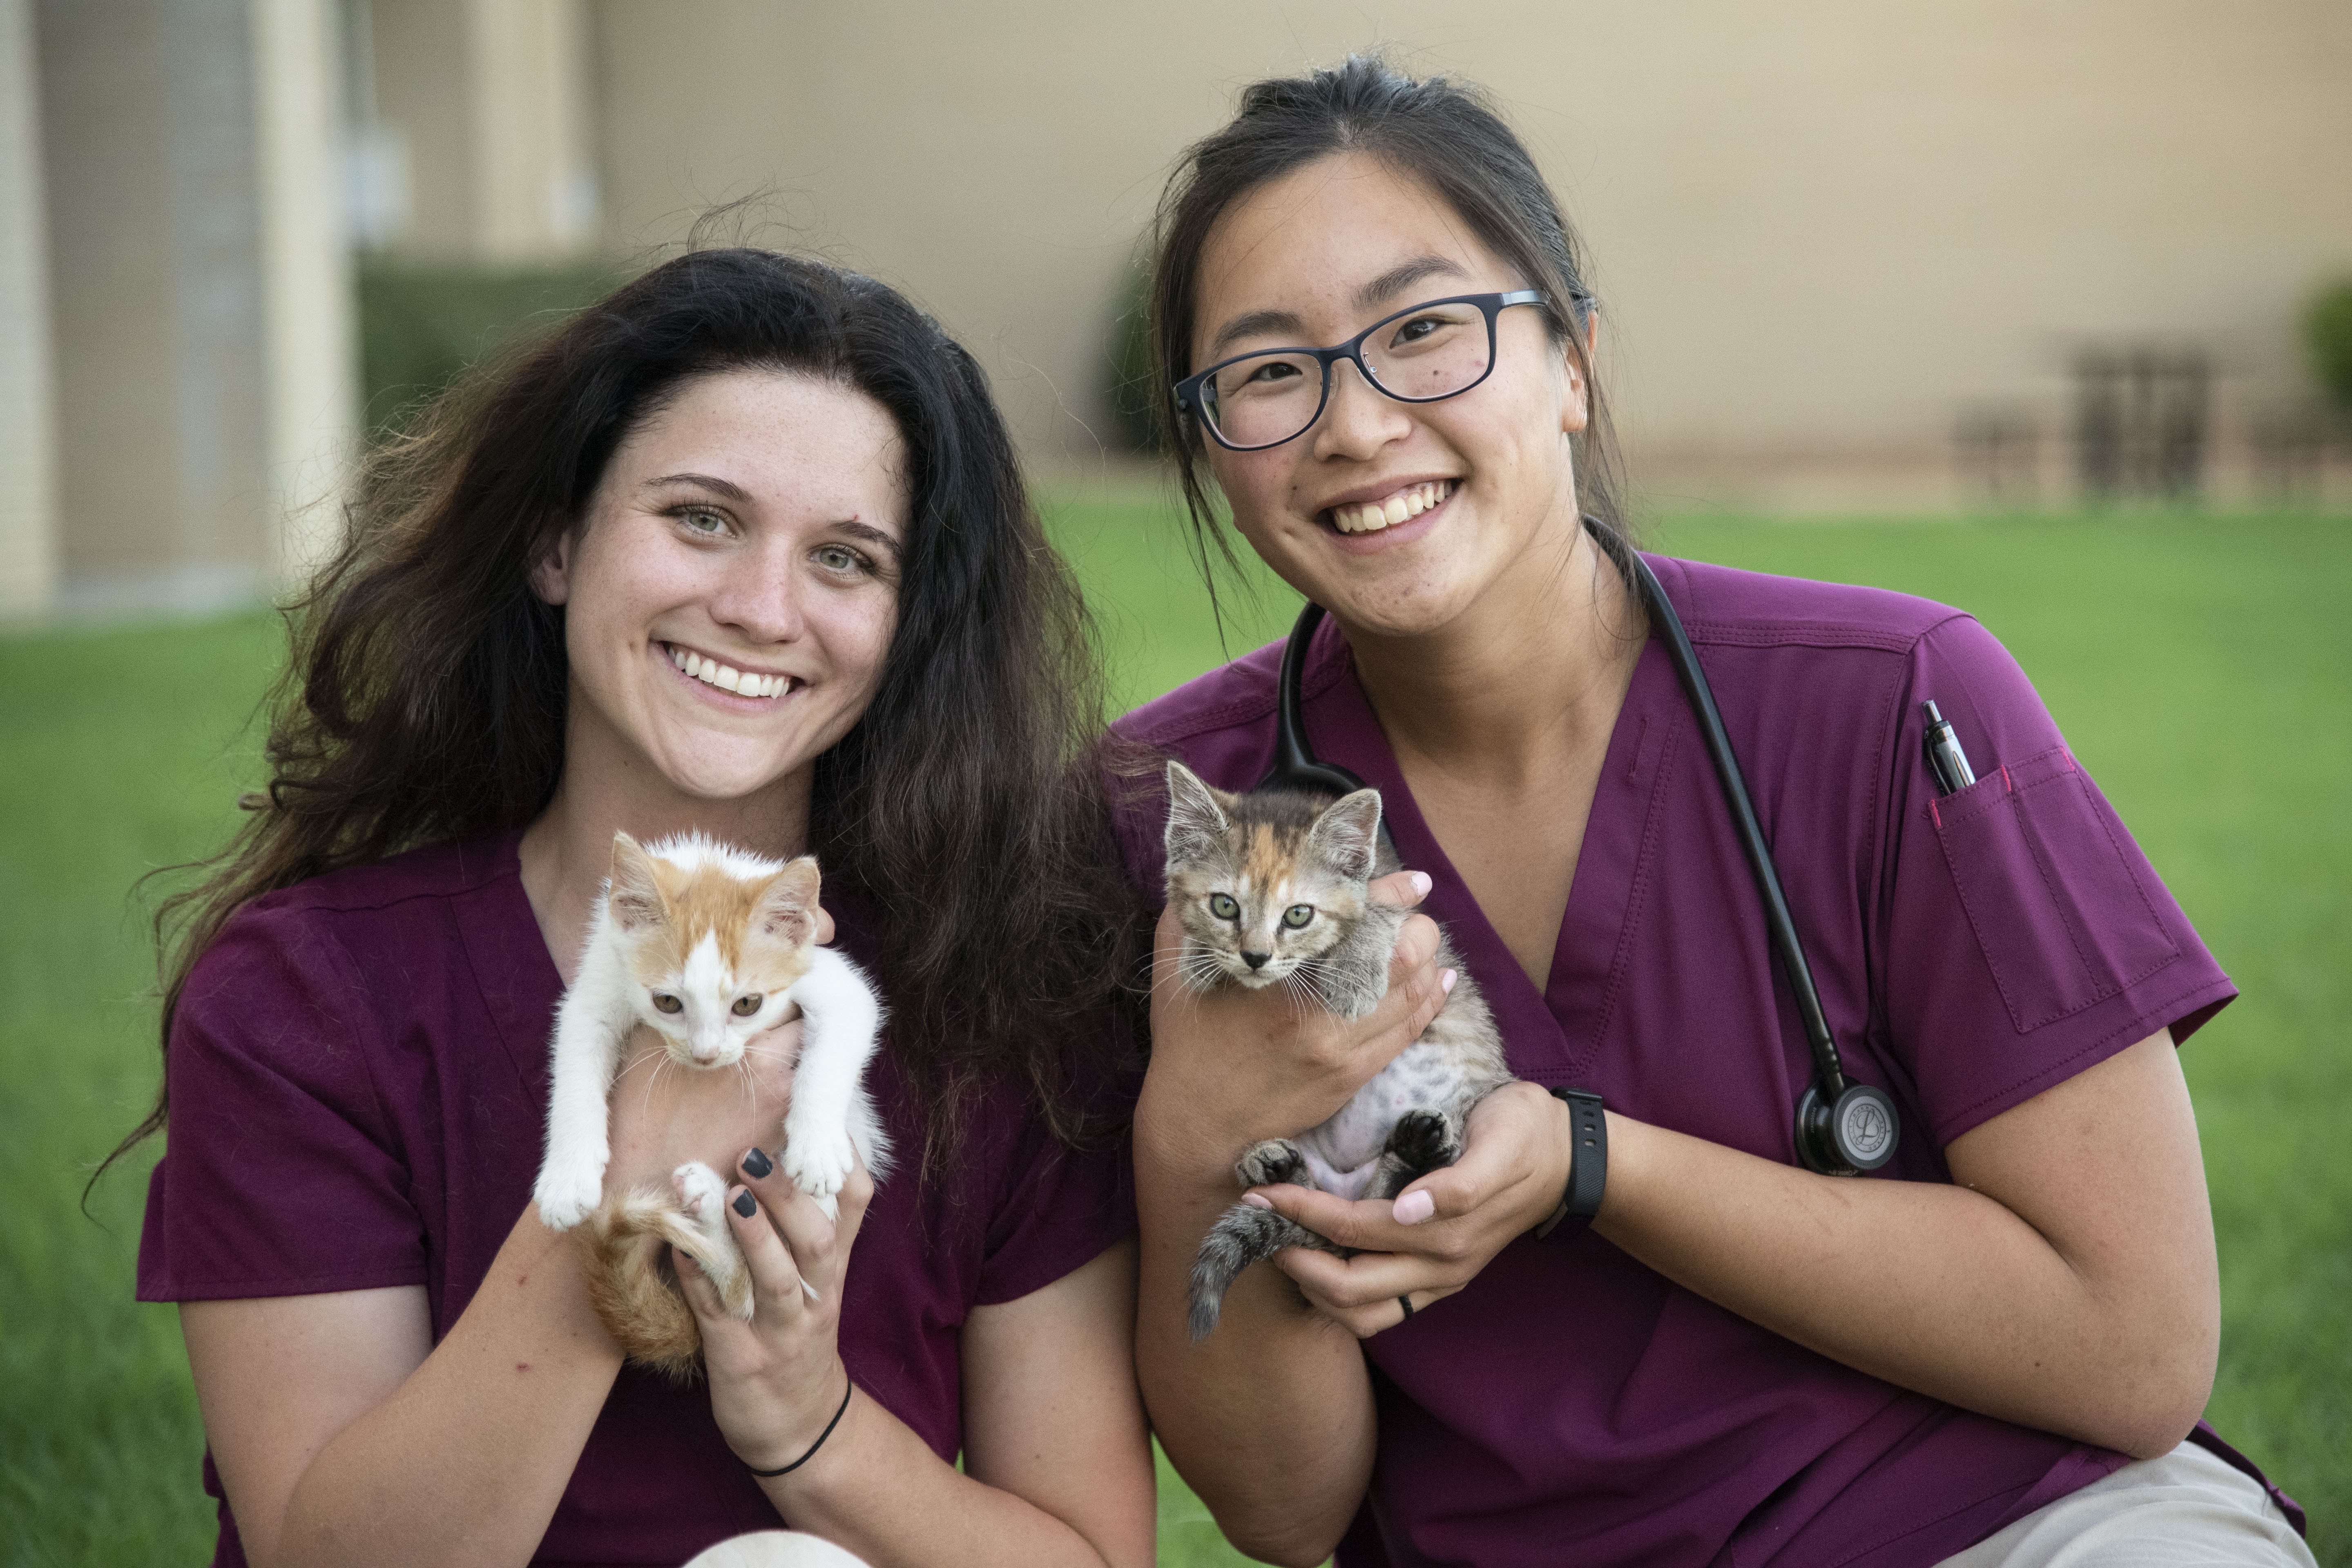 Vet students pose with kittens